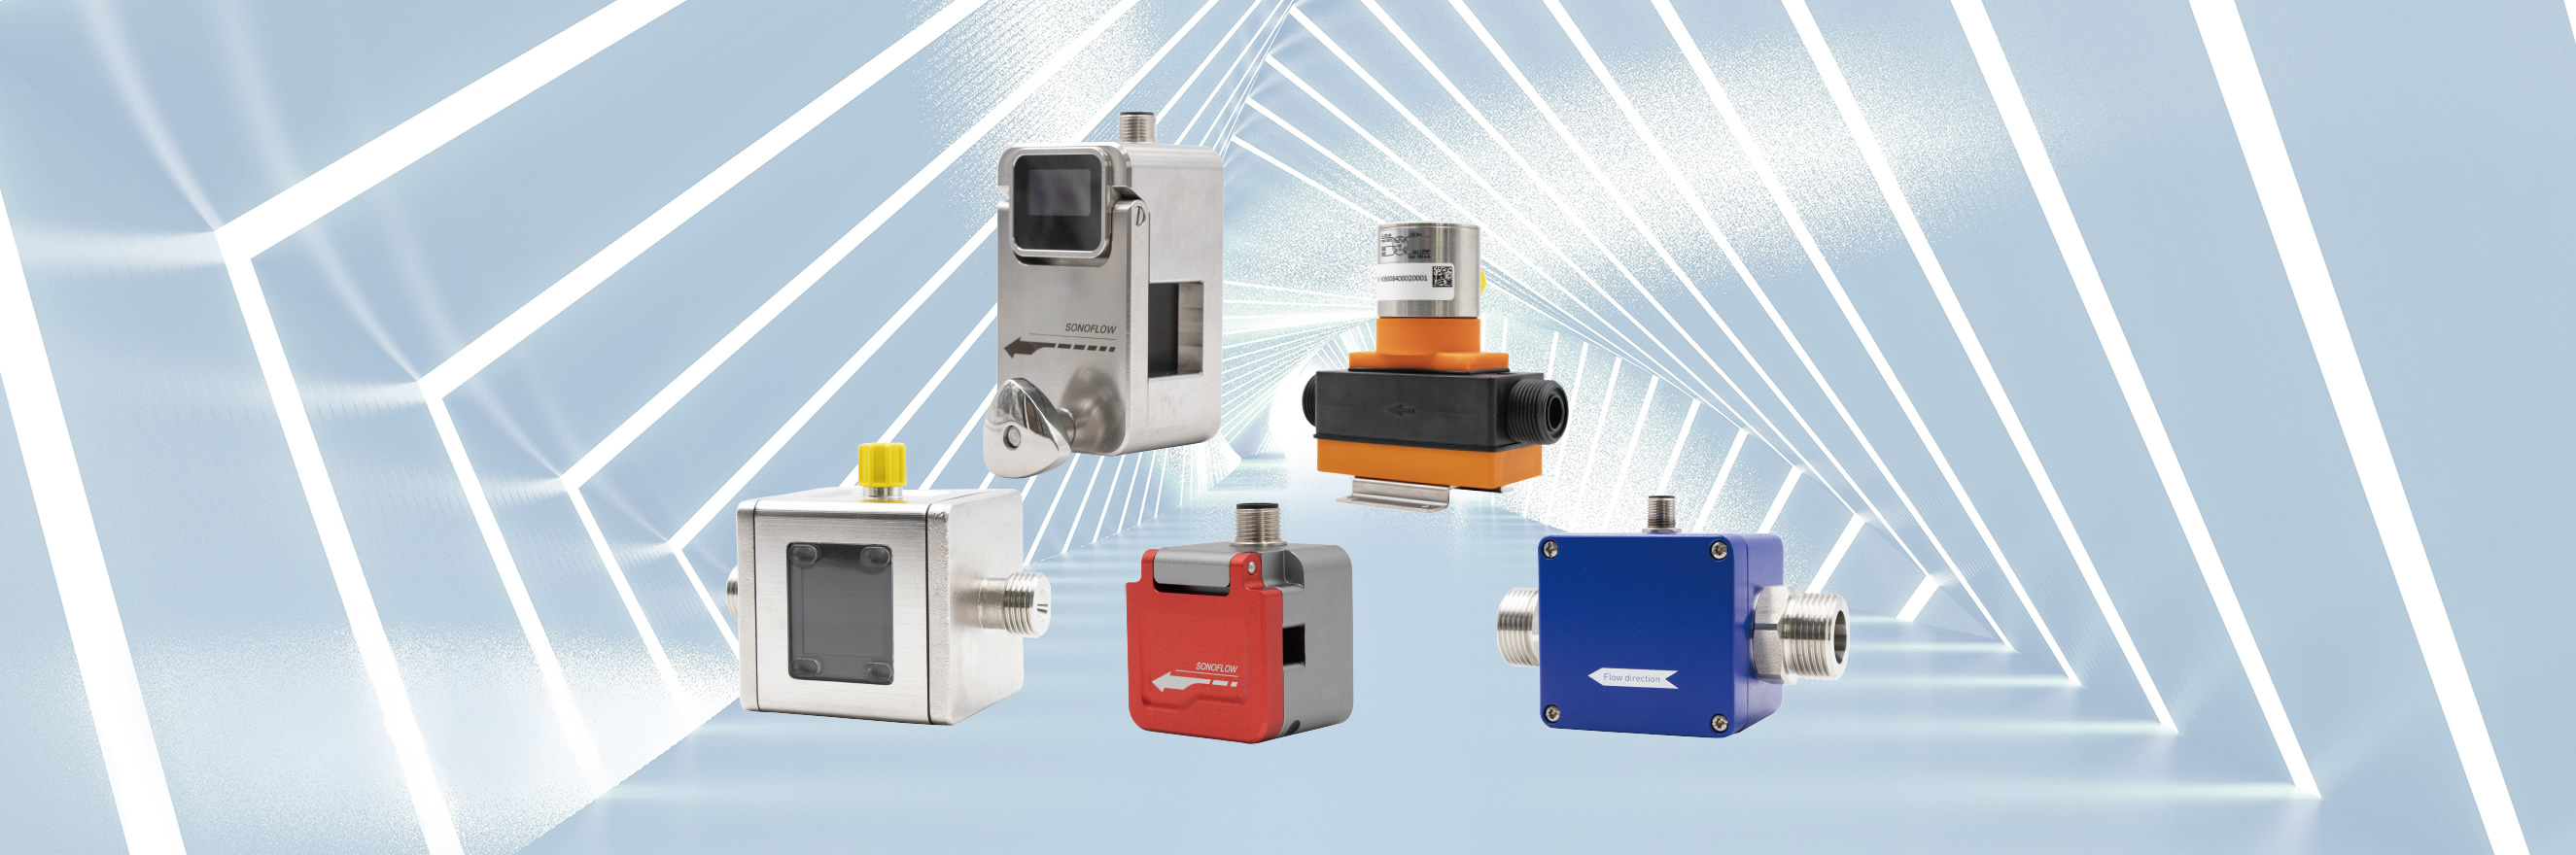 Field instruments for measuring and controlling flow, level, pressure